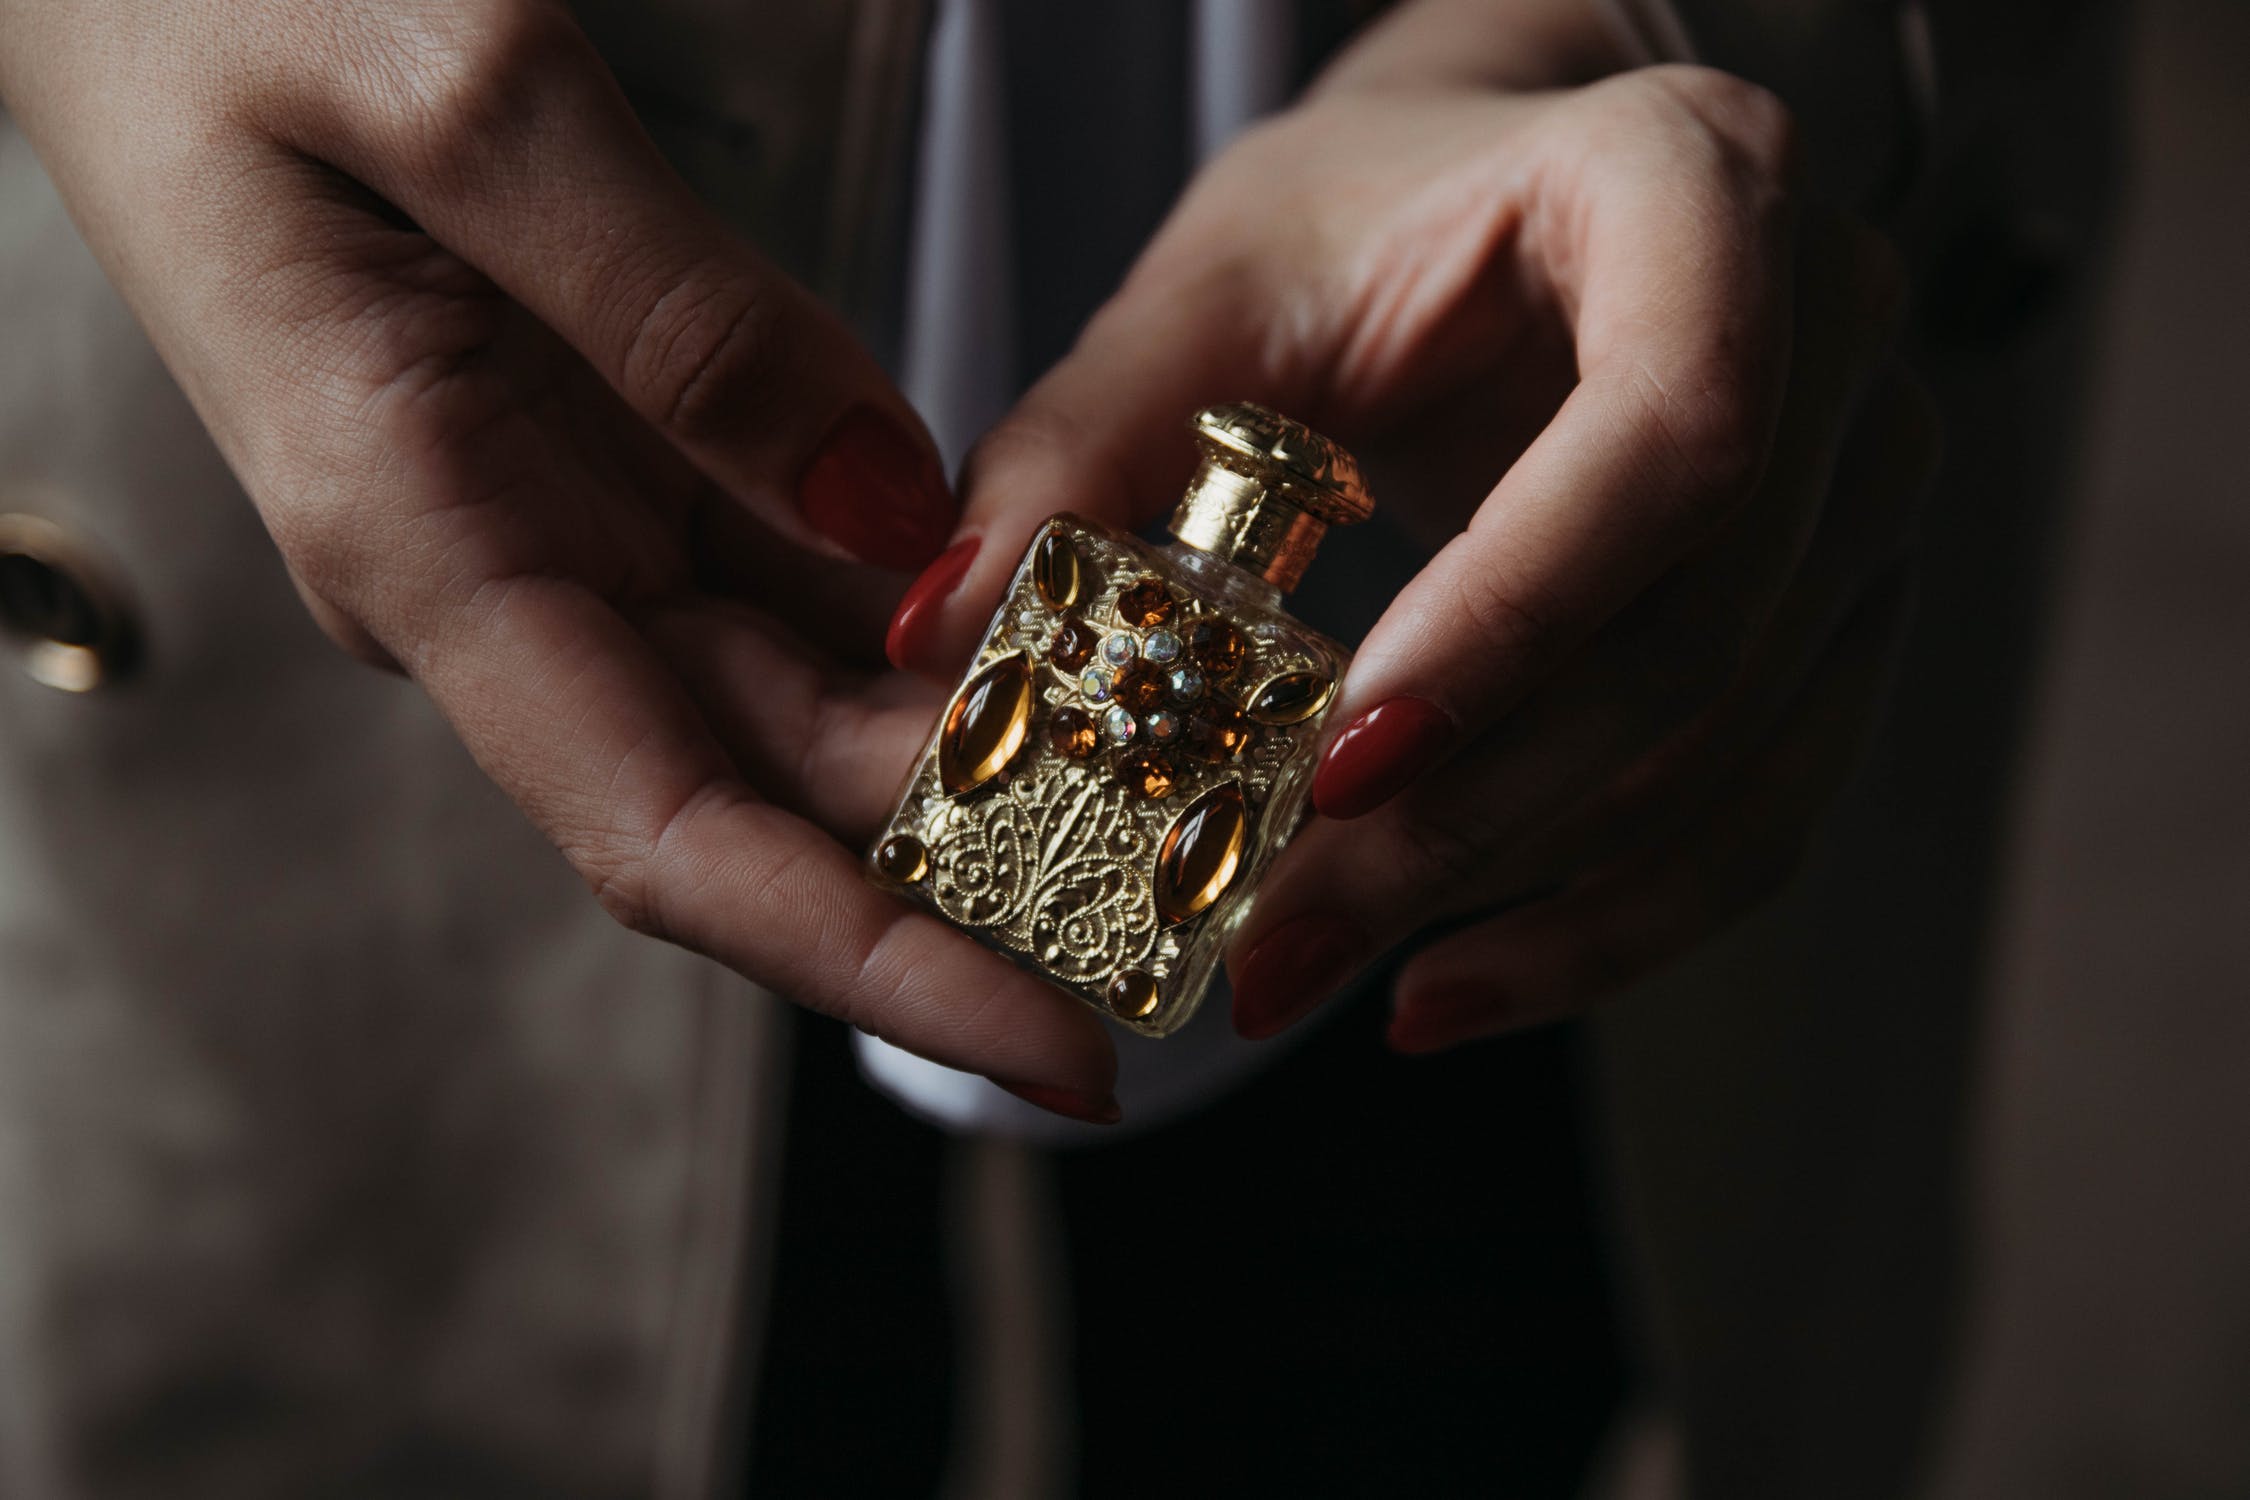 They found a jeweled perfume bottle in an old coat's pocket | Source: Pexels